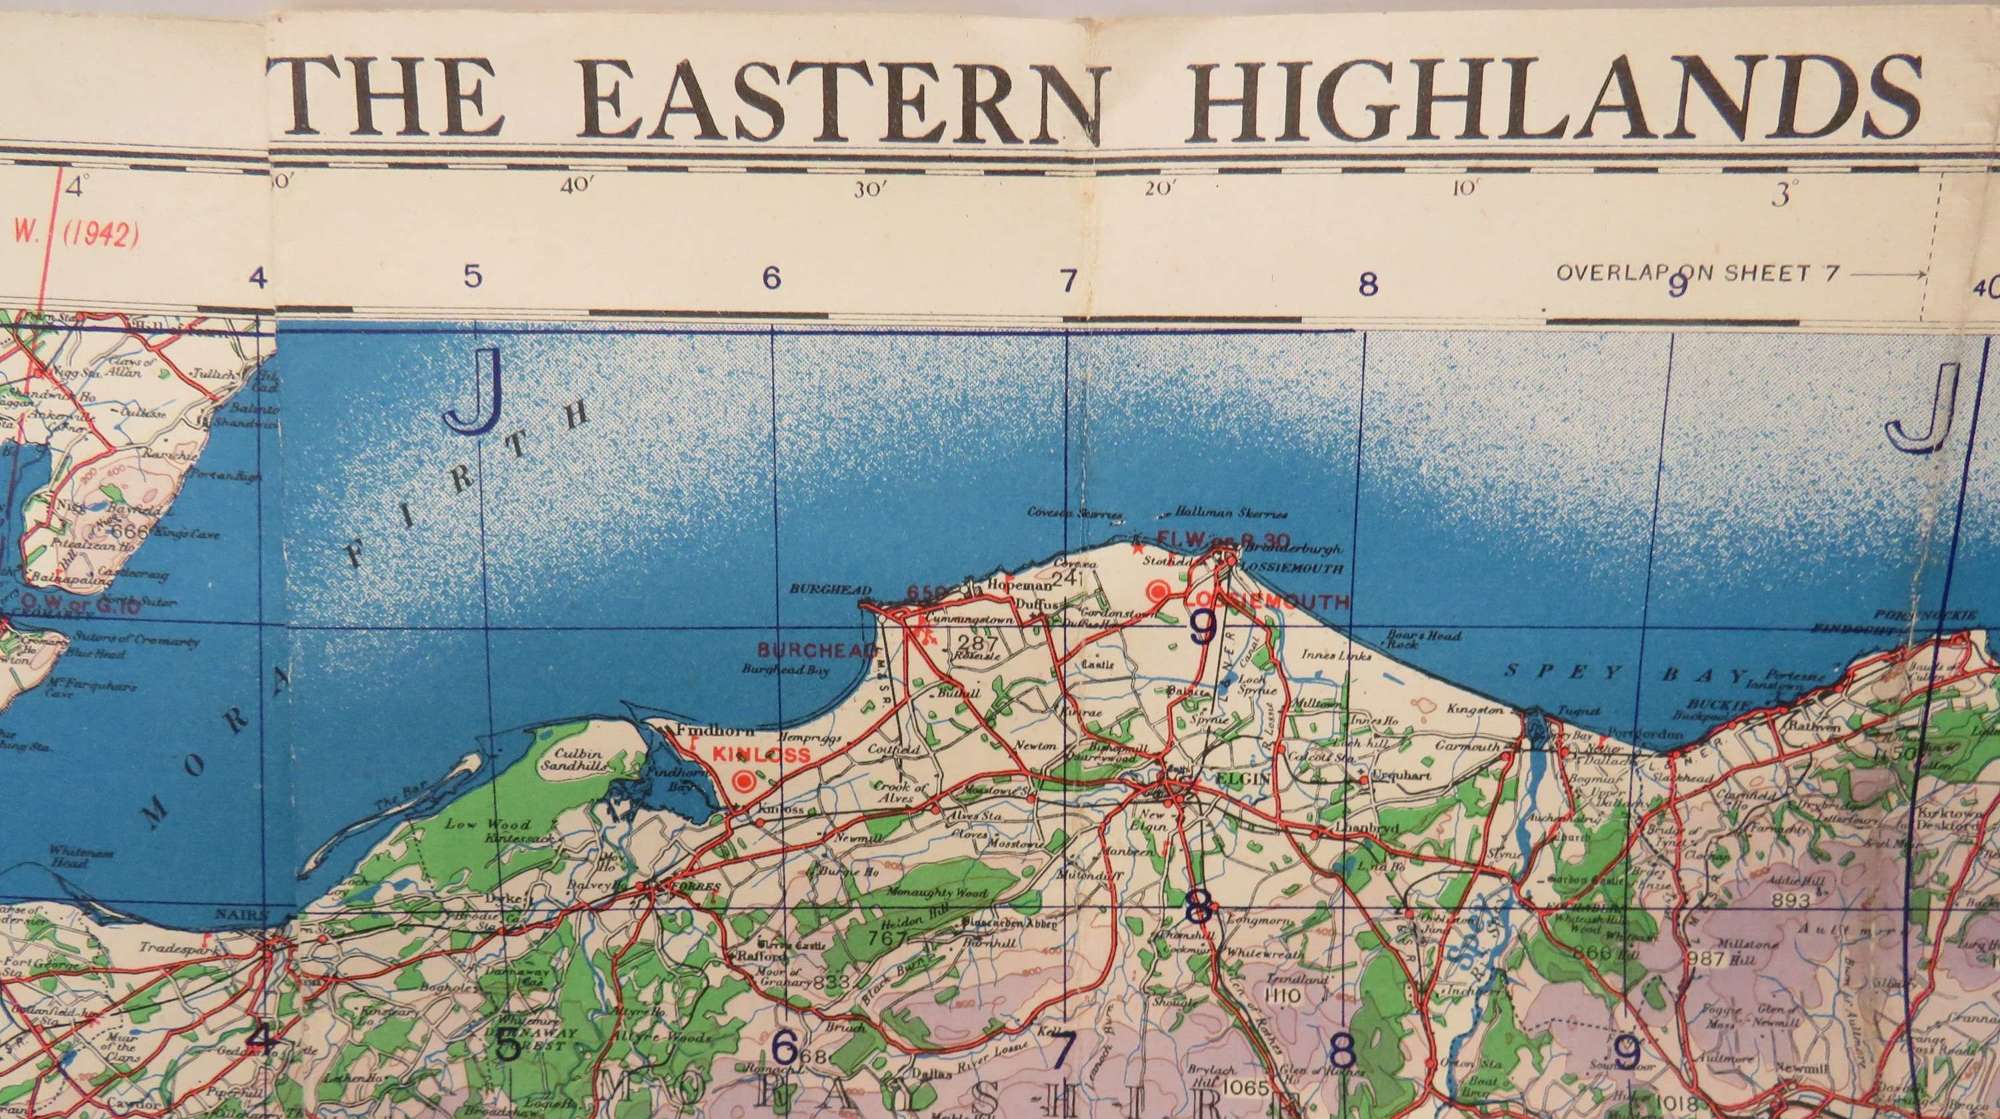 WW2 British Military / Air Map of The Eastern Highlands